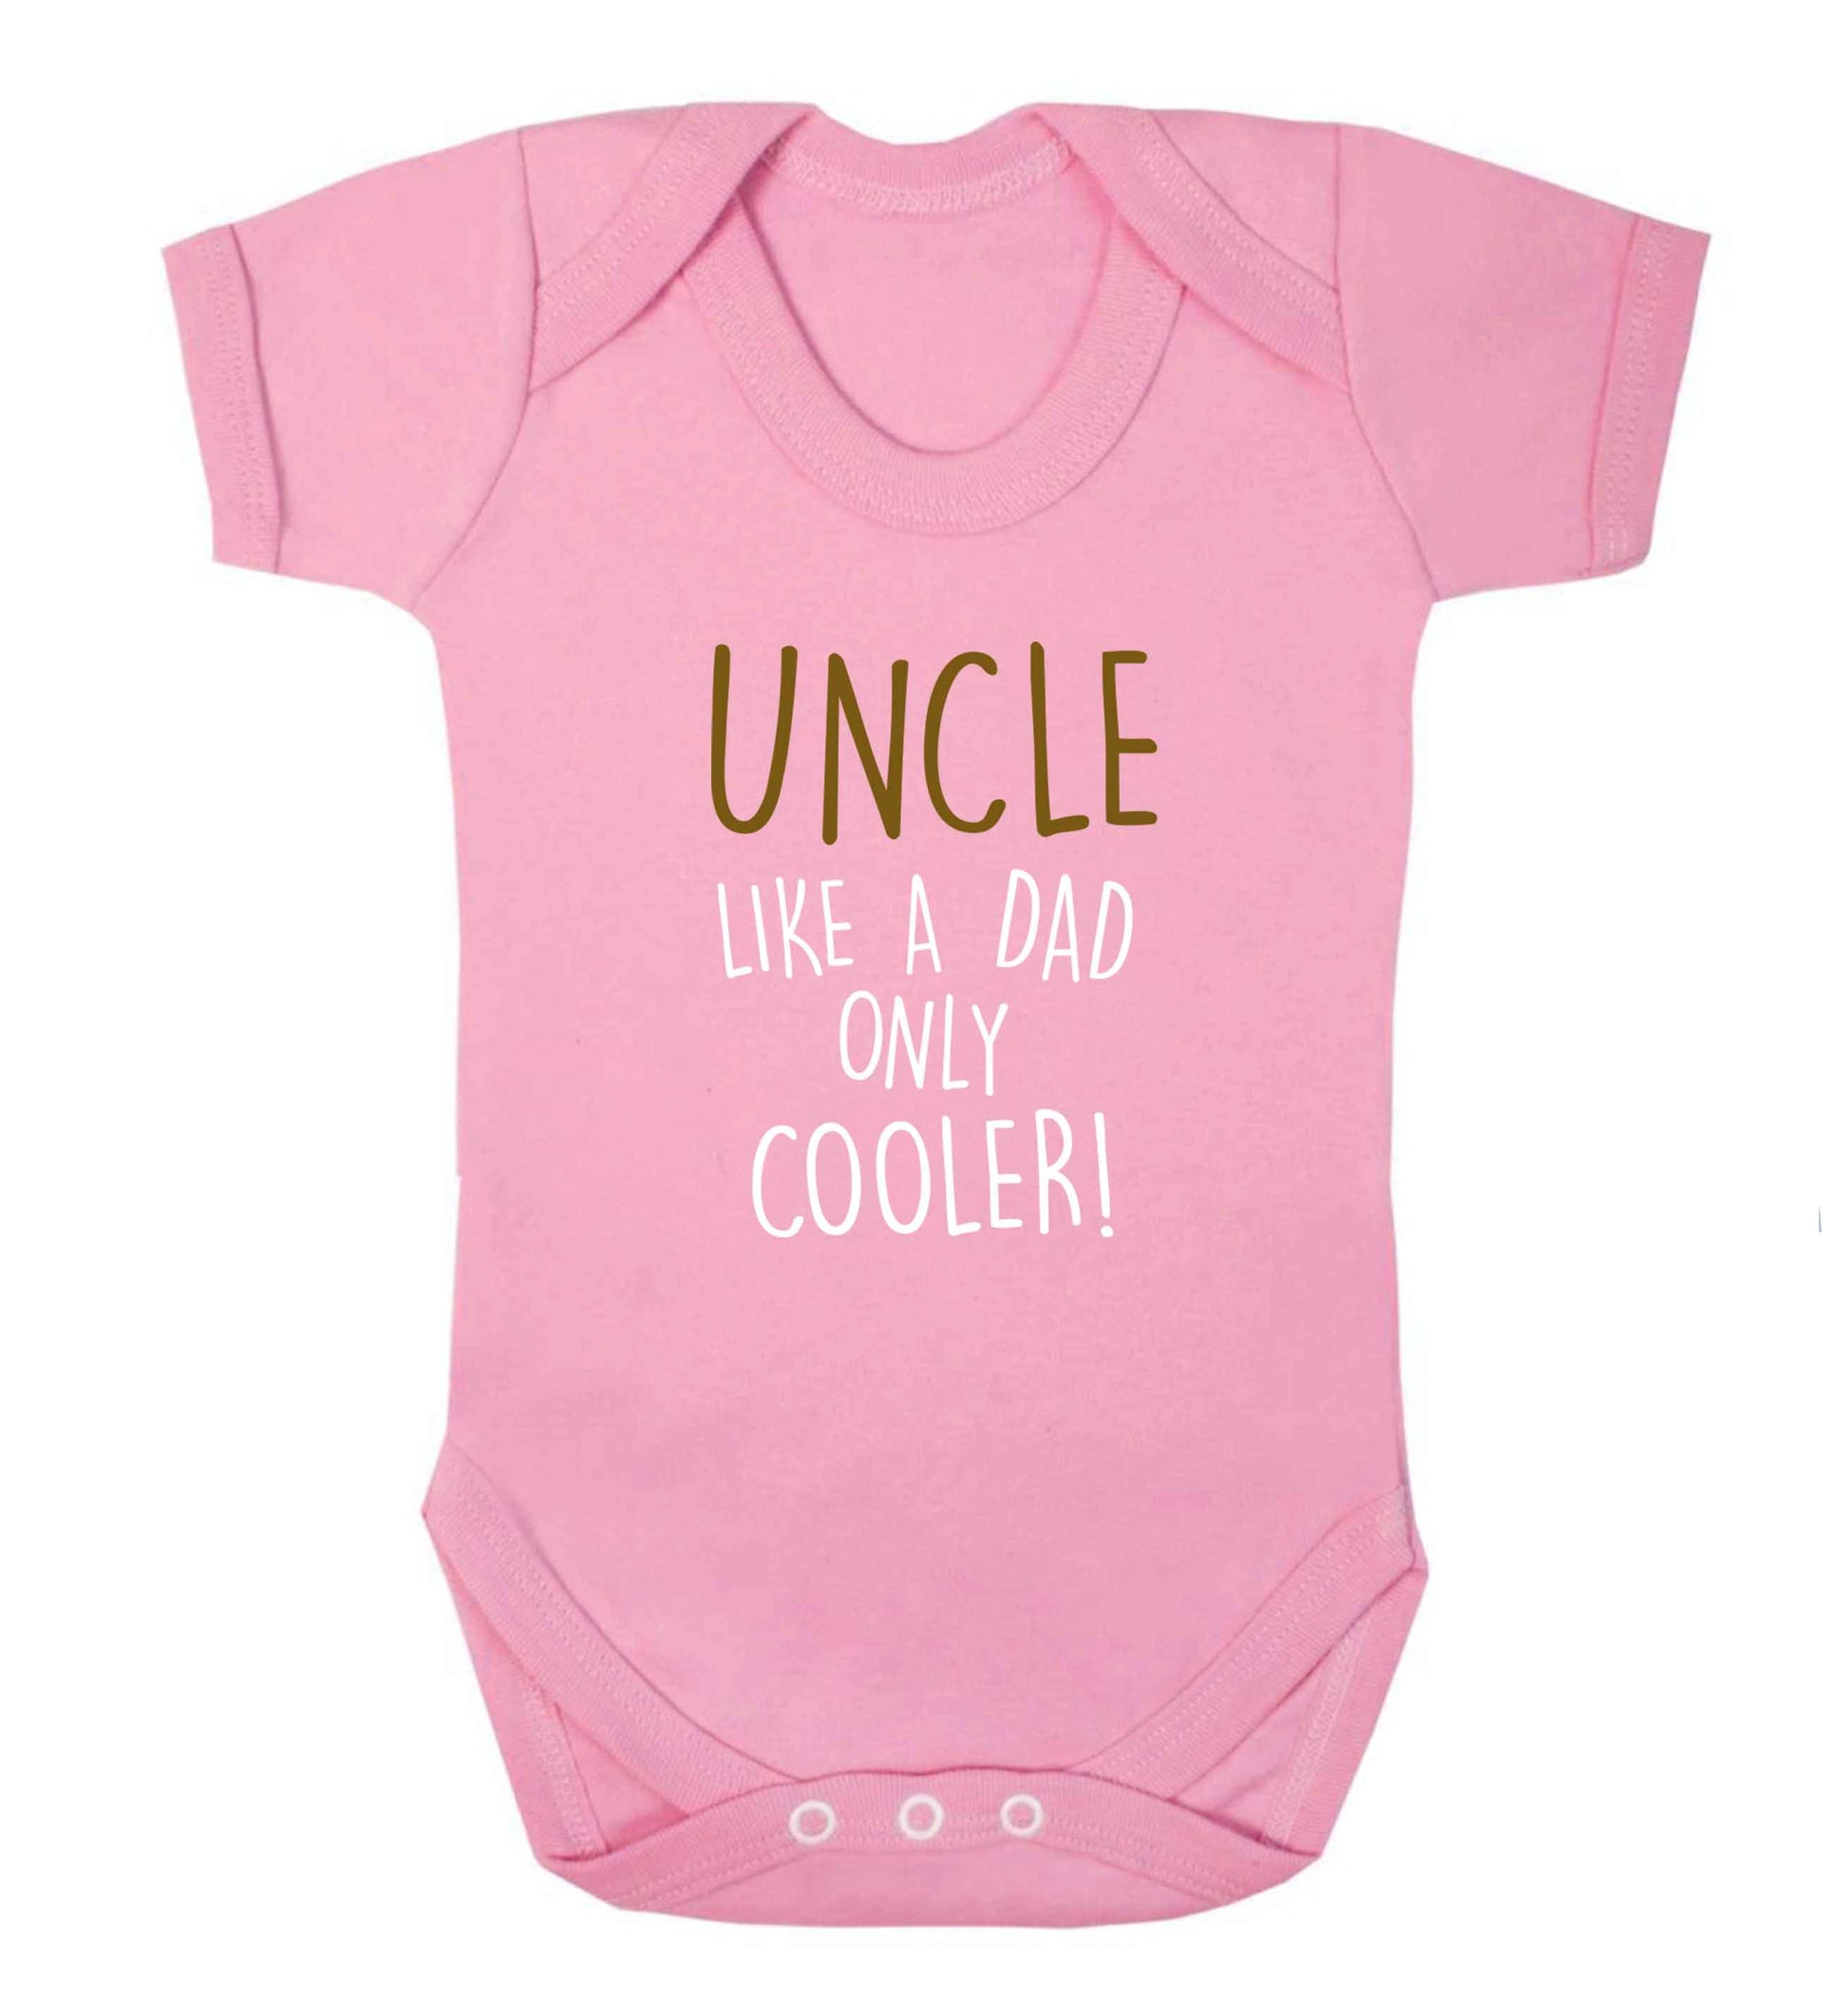 Uncle like a dad only cooler baby vest pale pink 18-24 months